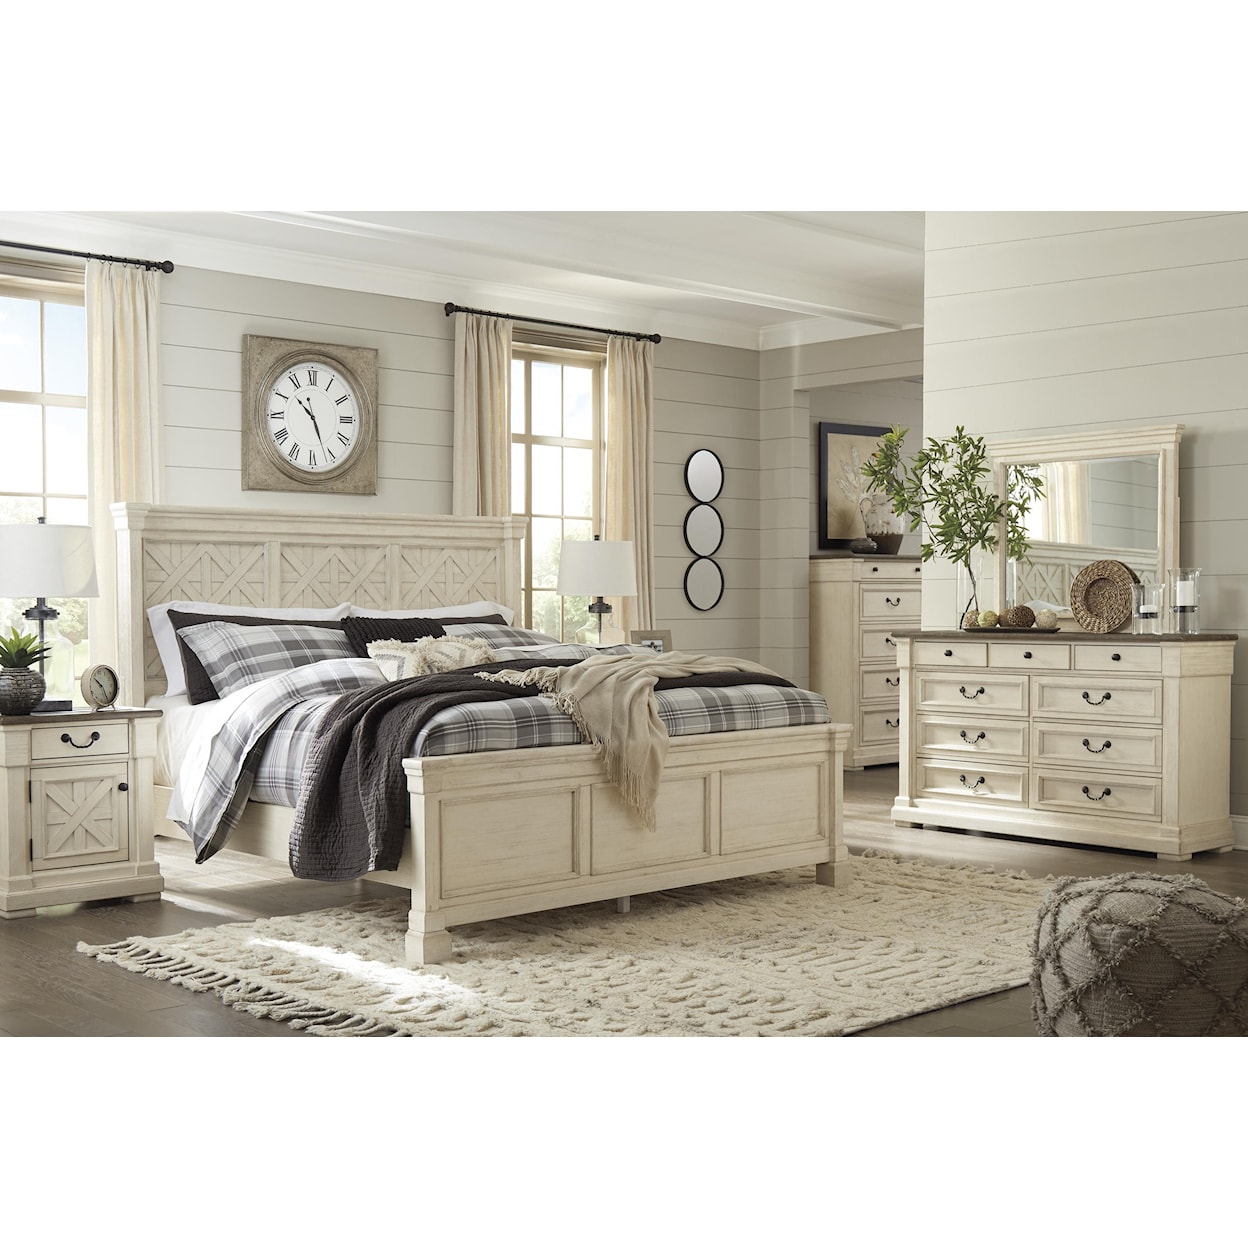 Signature Design by Ashley Bolanburg 5PC Queen Bedroom Group